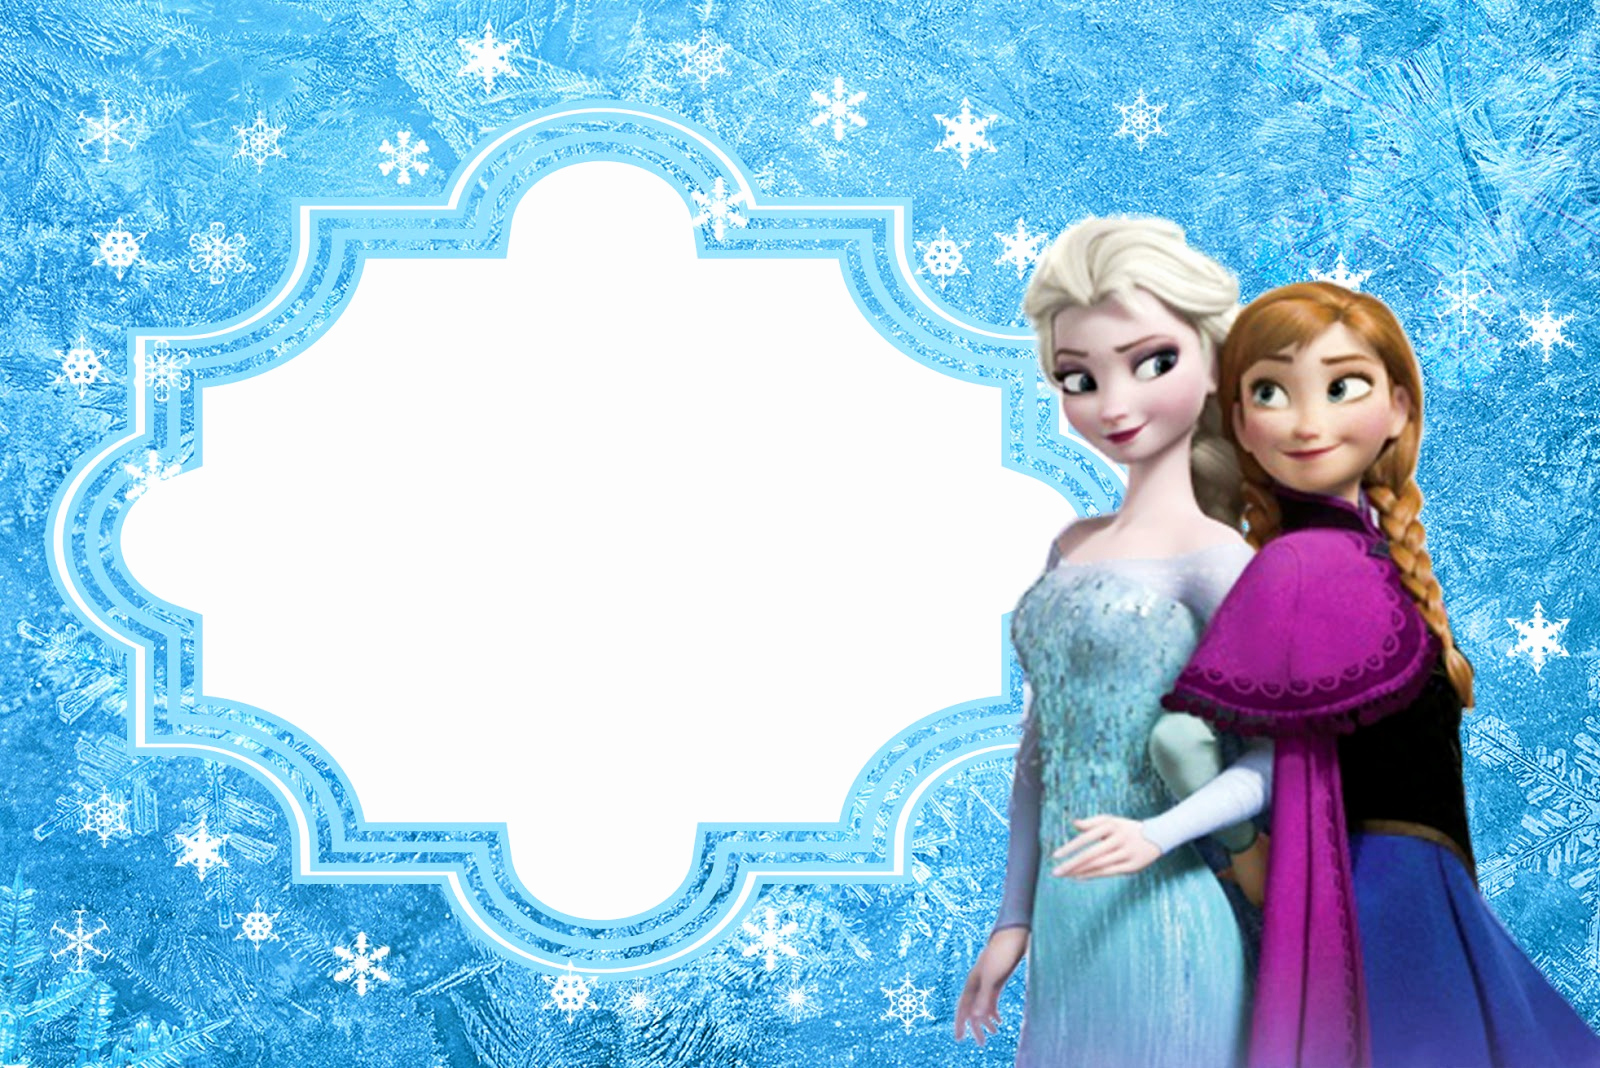 Free Frozen Invitation Template Best Of Frozen Free Printable Cards or Party Invitations Oh My